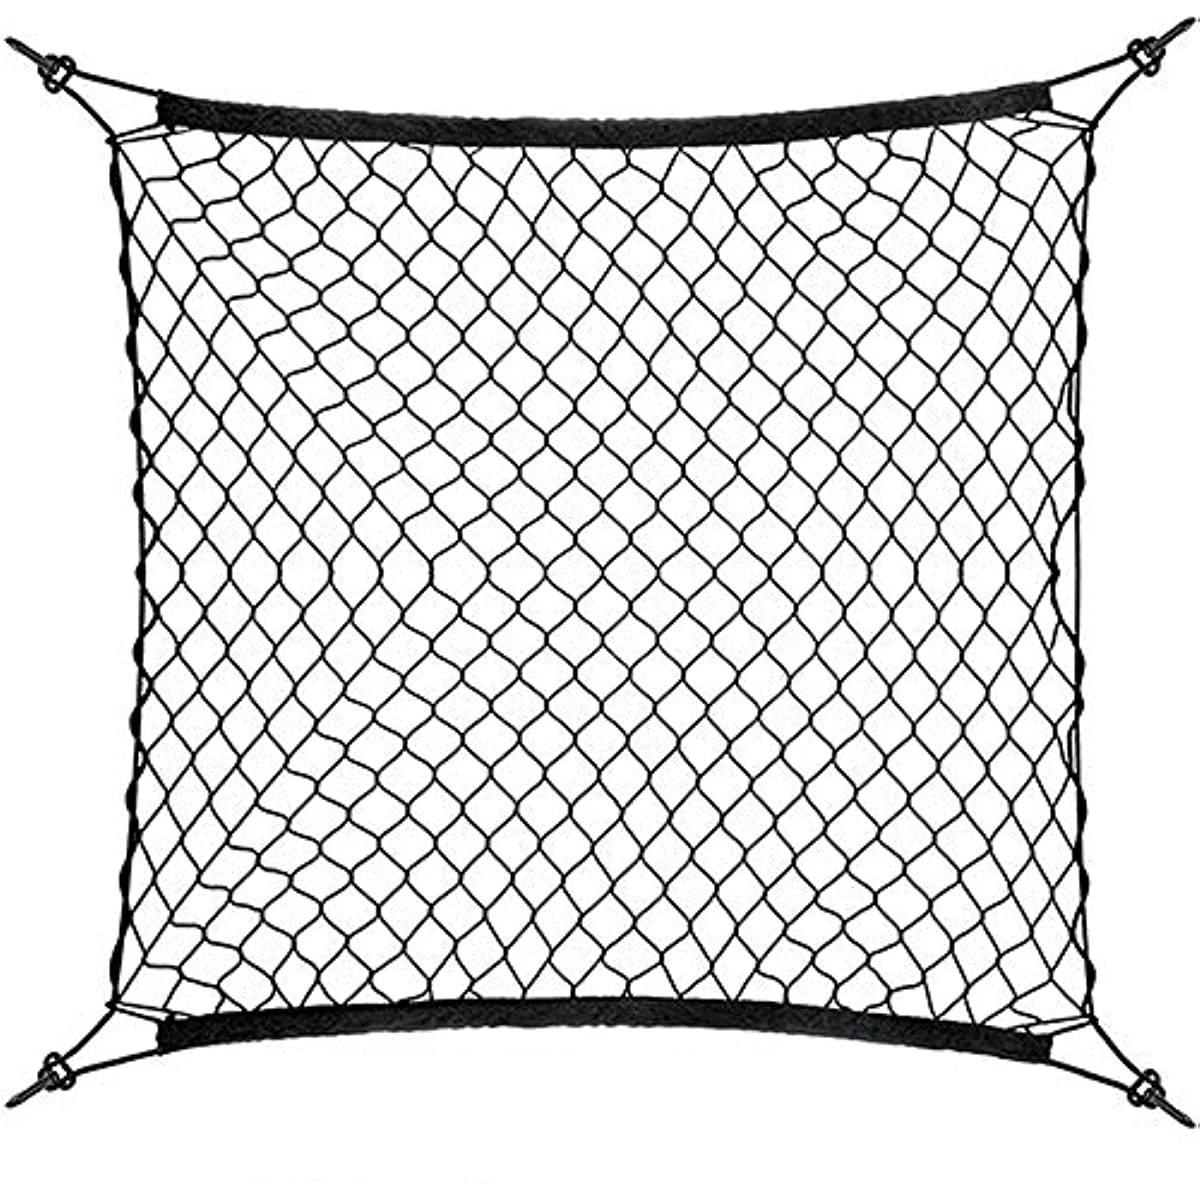 4 HooK Car Trunk Cargo Mesh Net Luggage For Volvo S40 S60 S70 S80 S90 V4... - £11.57 GBP